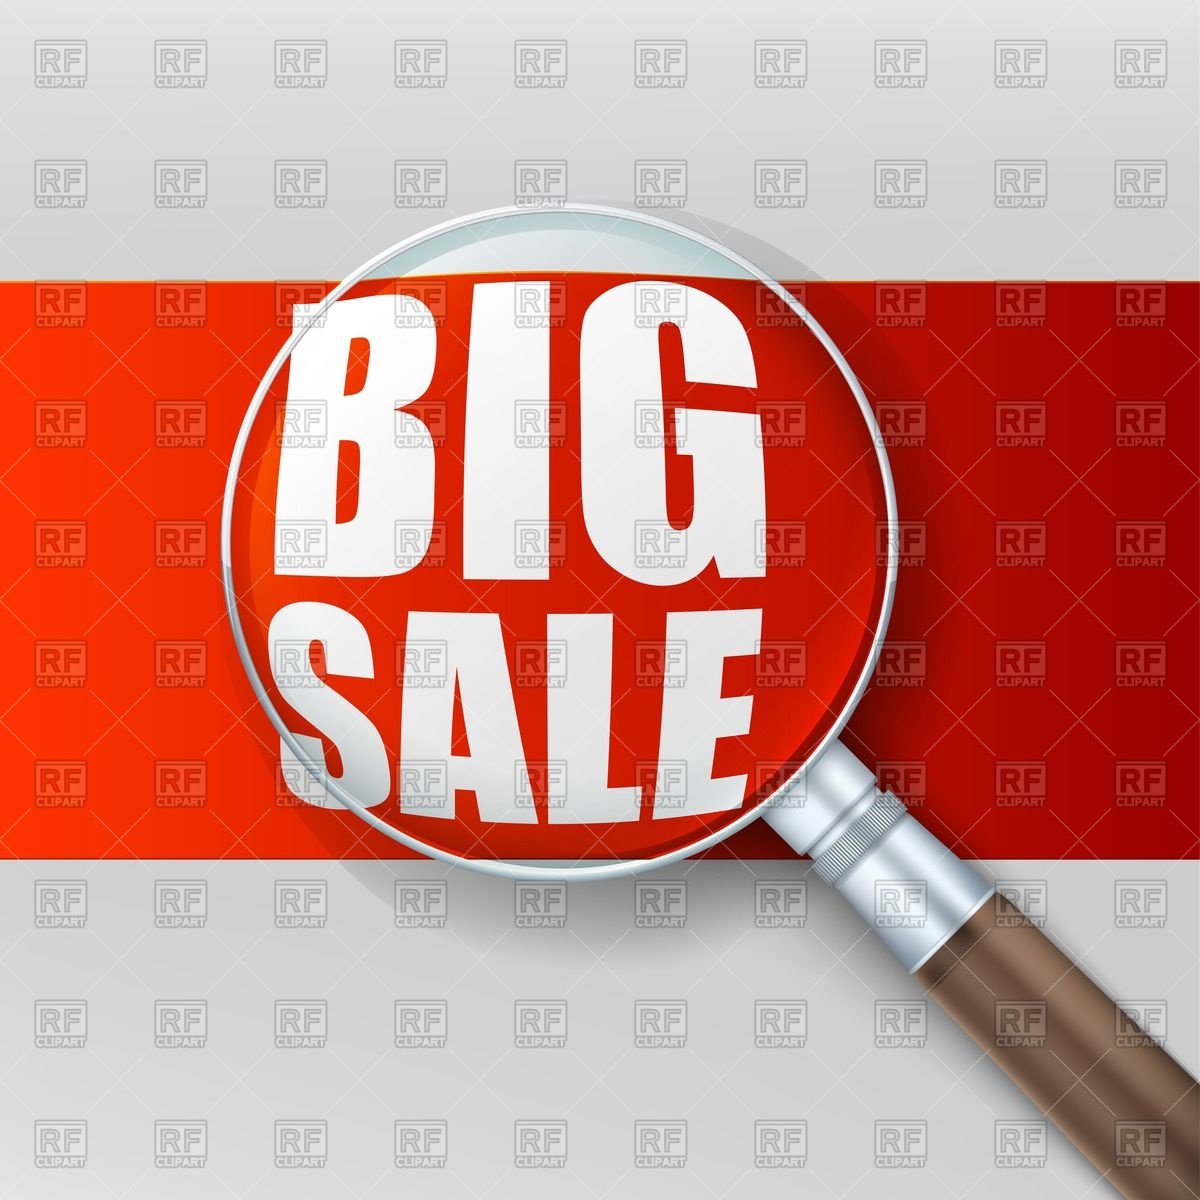 Big Sale   Magnifying Glass Over Advertising Banner Download Royalty